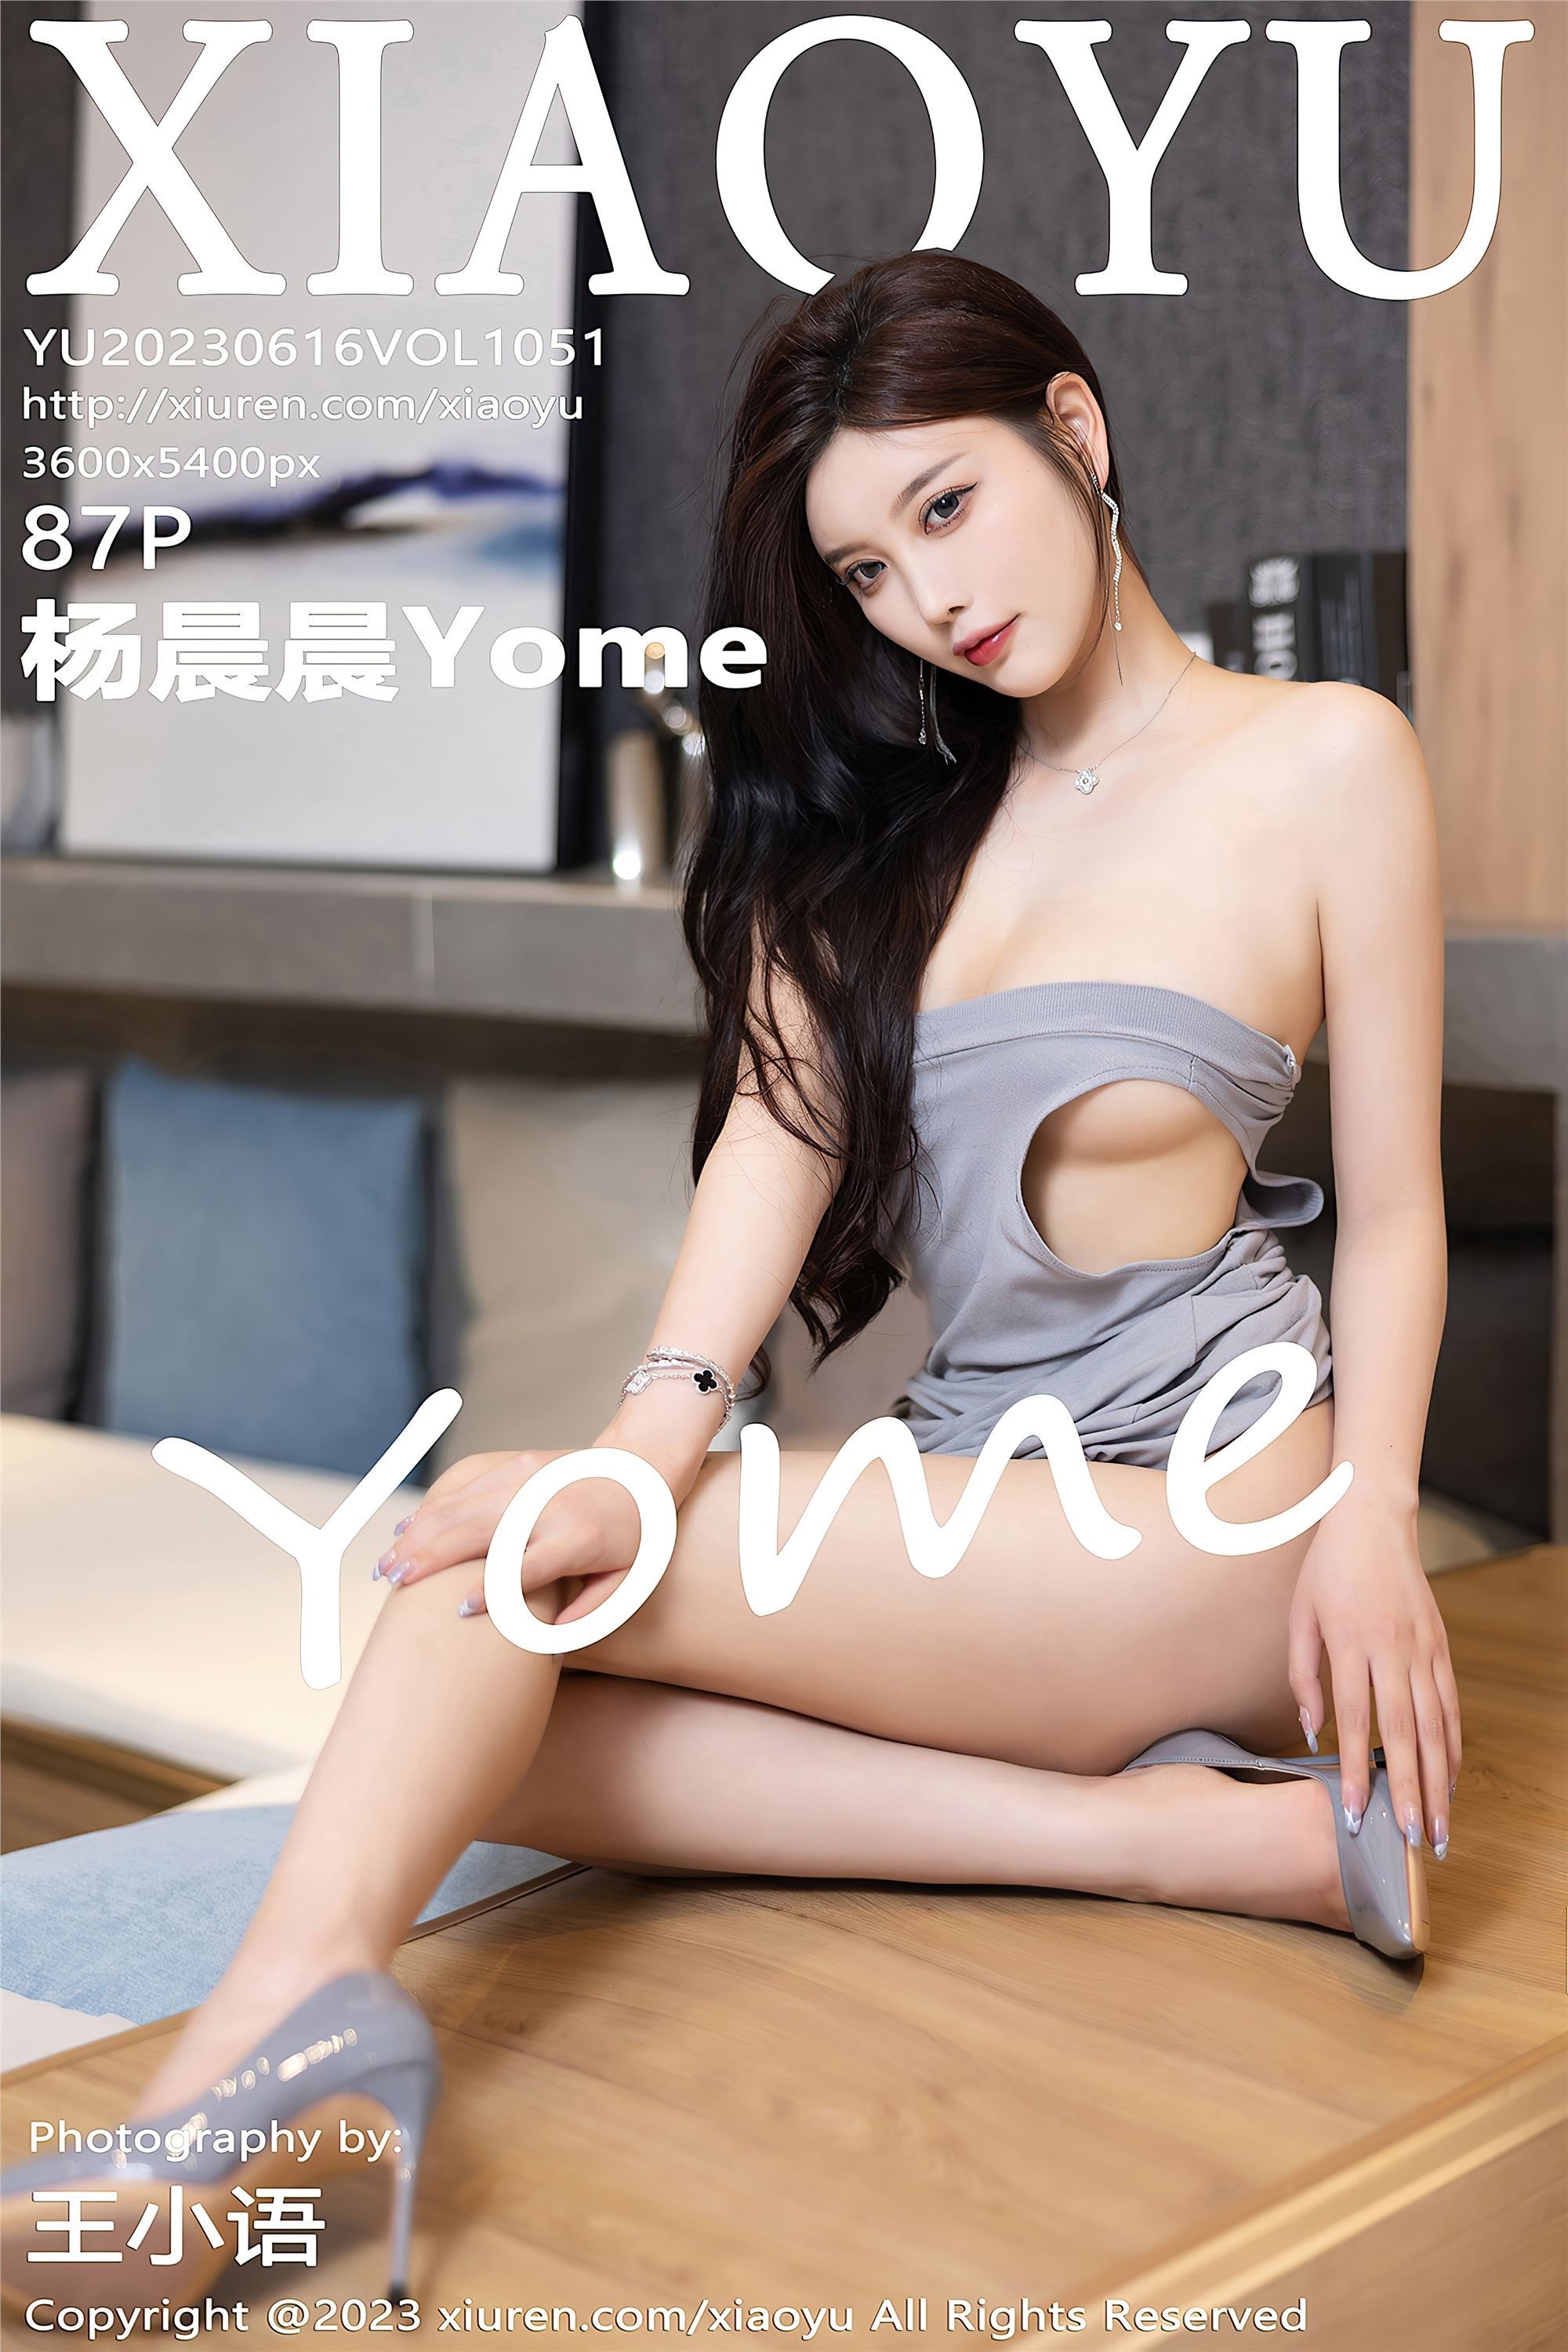 XiaoYu Language and Painting Industry June 16, 2023 VOL.1051 Yang Chenchen Yome